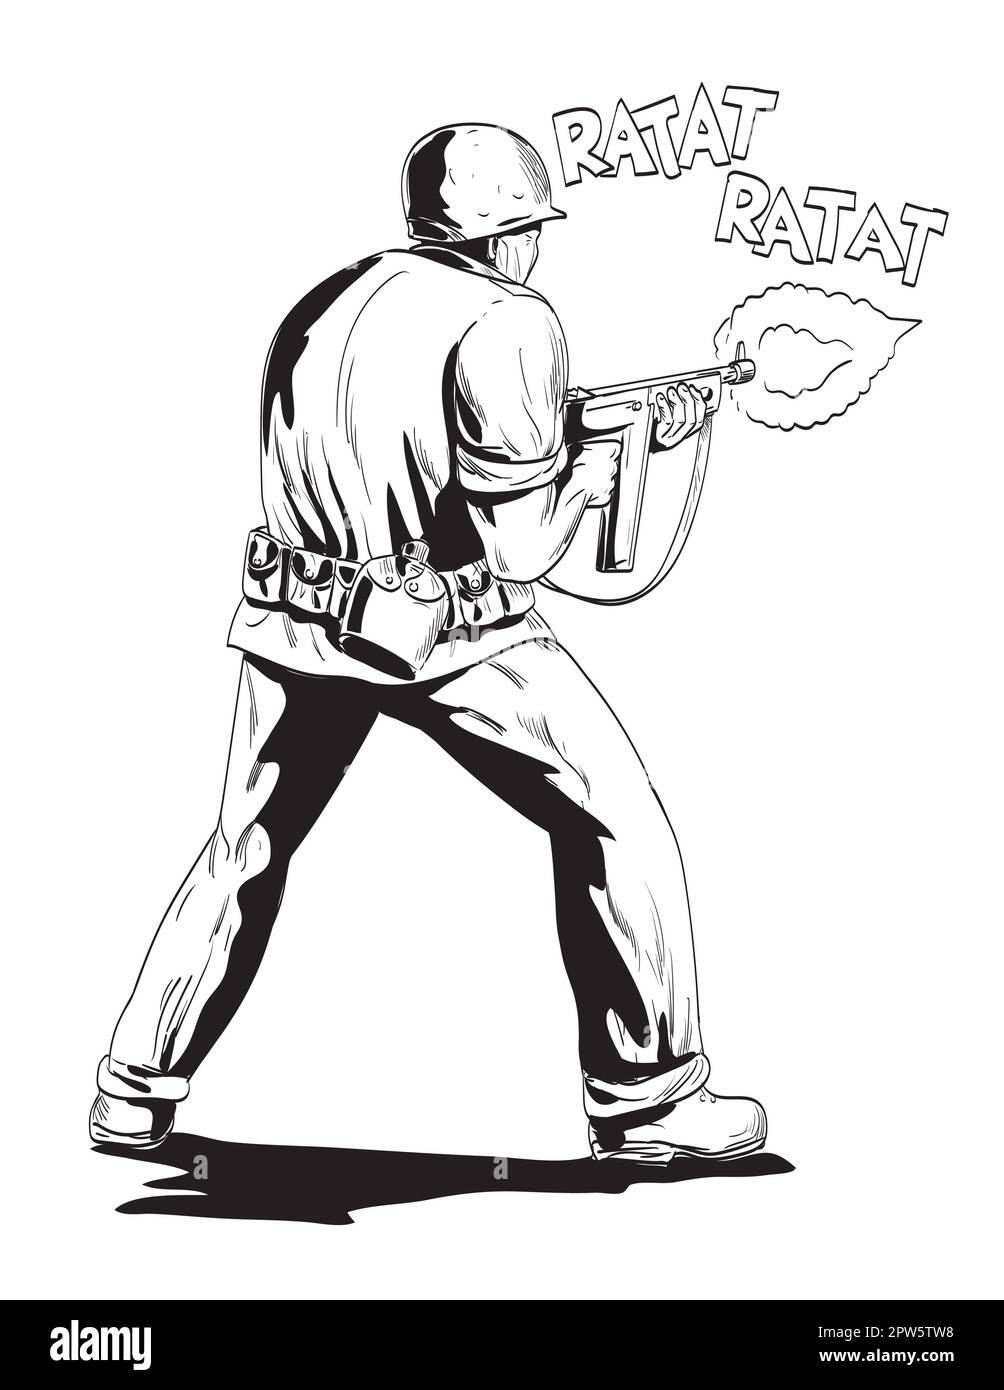 Comics style drawing or illustration of a World War Two American GI soldier firing aiming rifle viewed from front on isolated background in black and Stock Photo